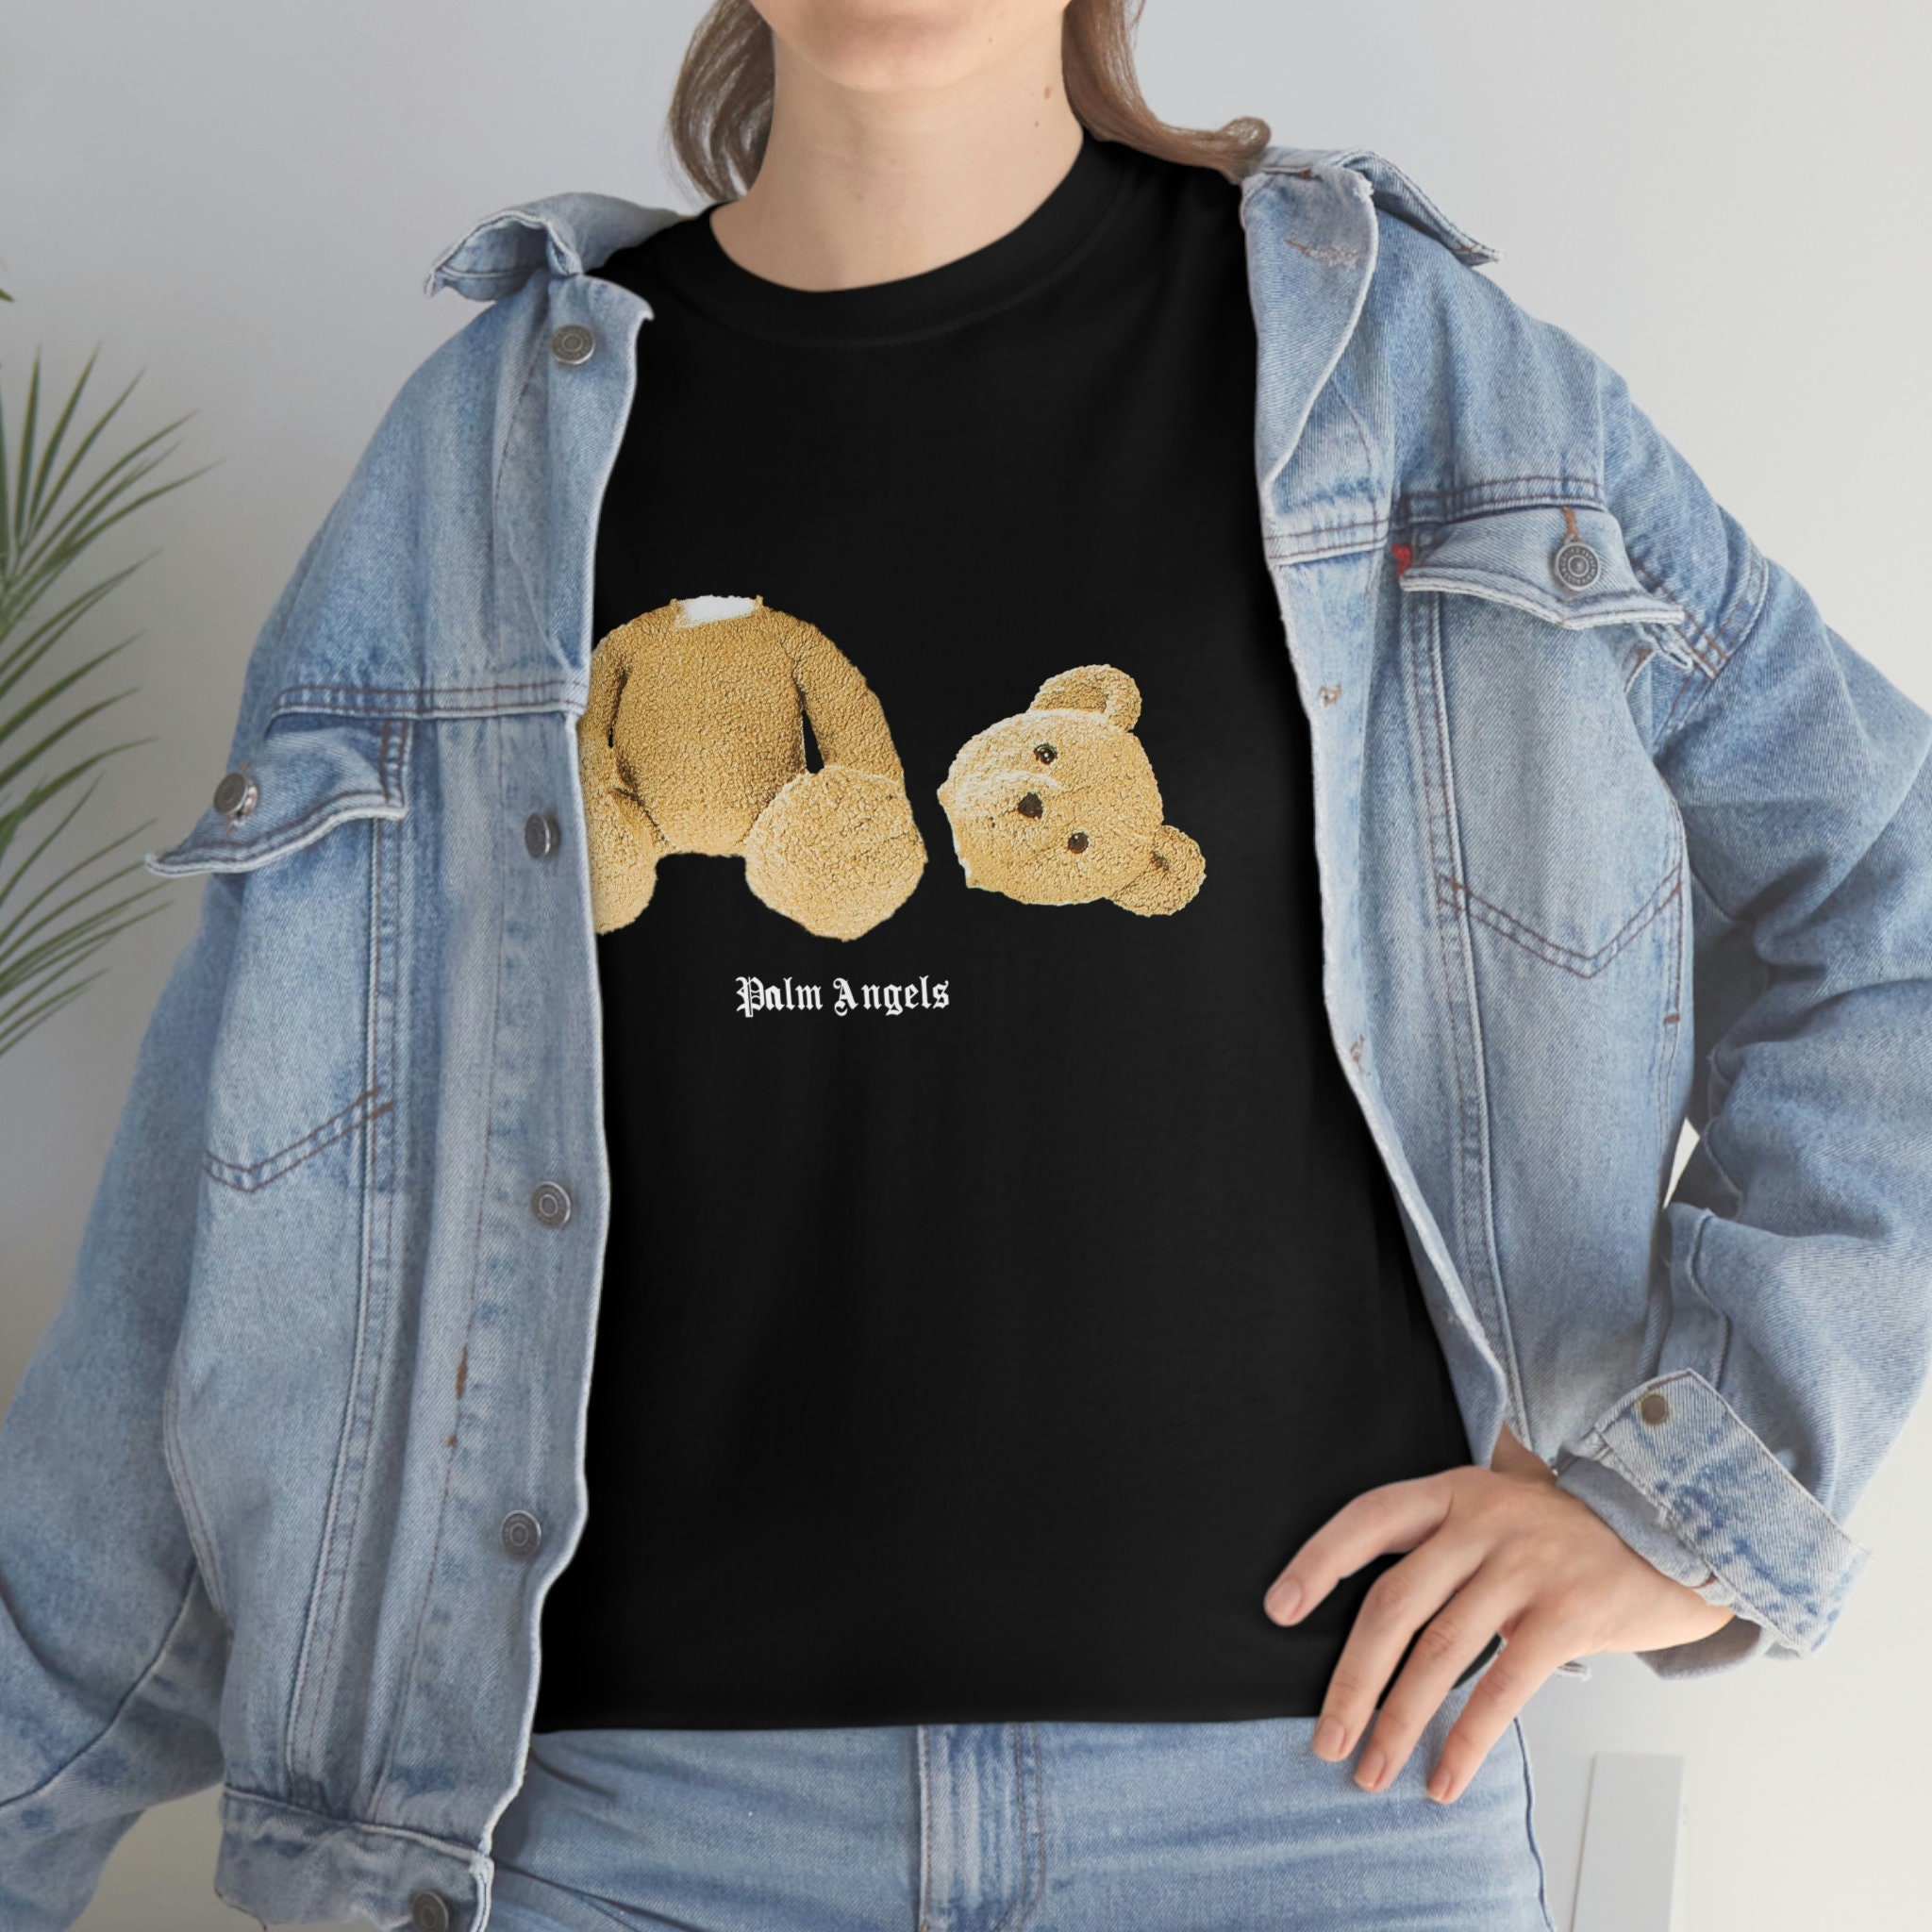 Palm Angels Decapitated Bear T-Shirt sold by Daisy